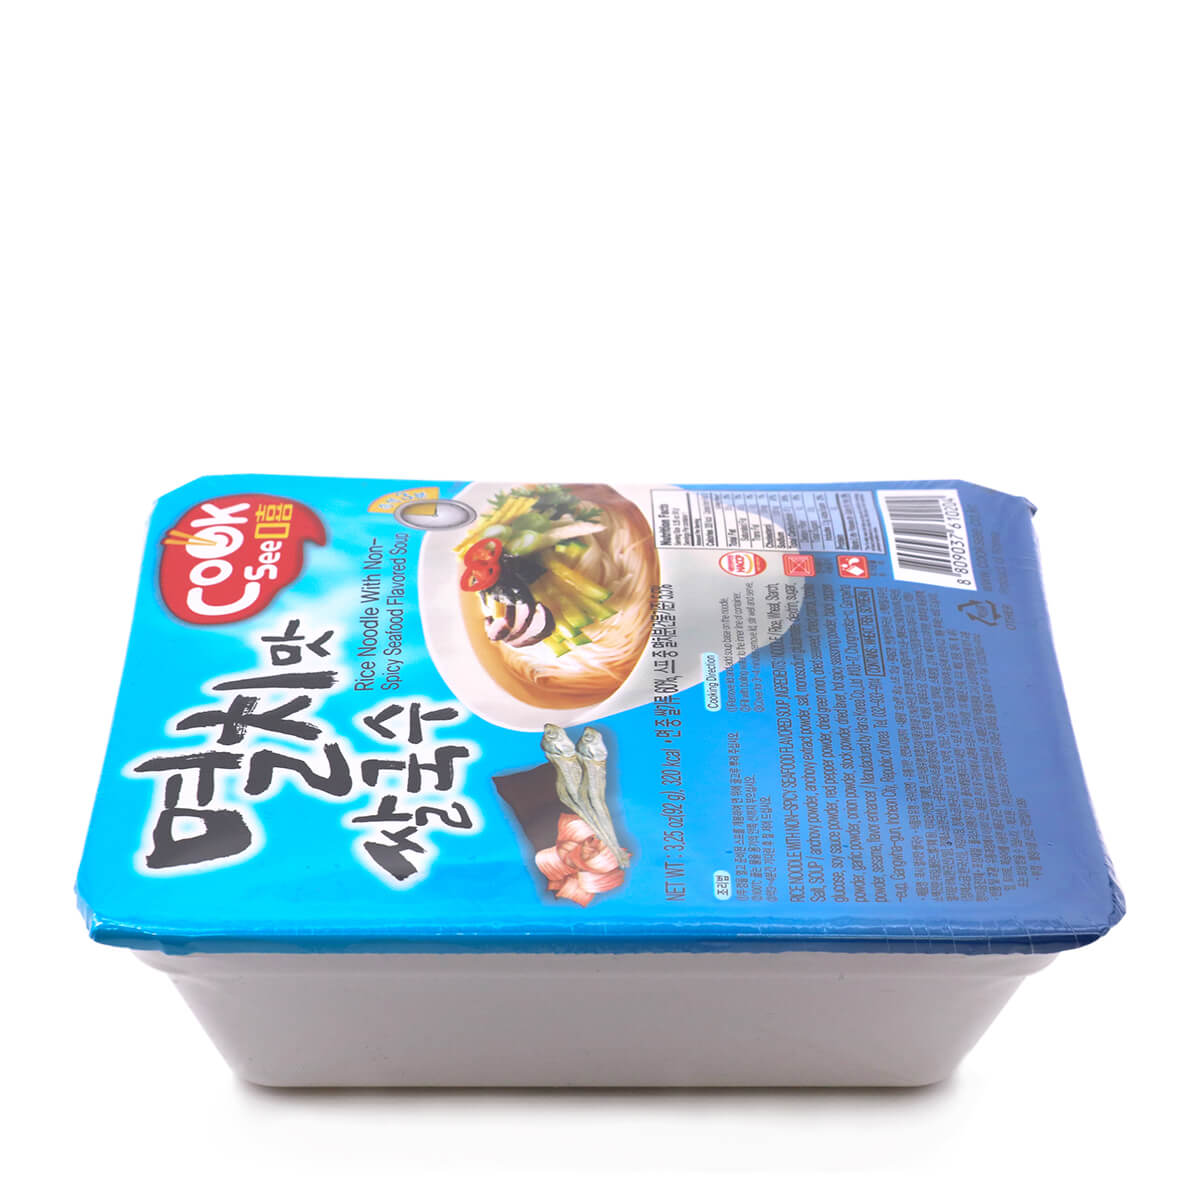 COOK SEE Rice Noodle with Non-Spicy Seafood Flavored Soup 3.25oz (92g)